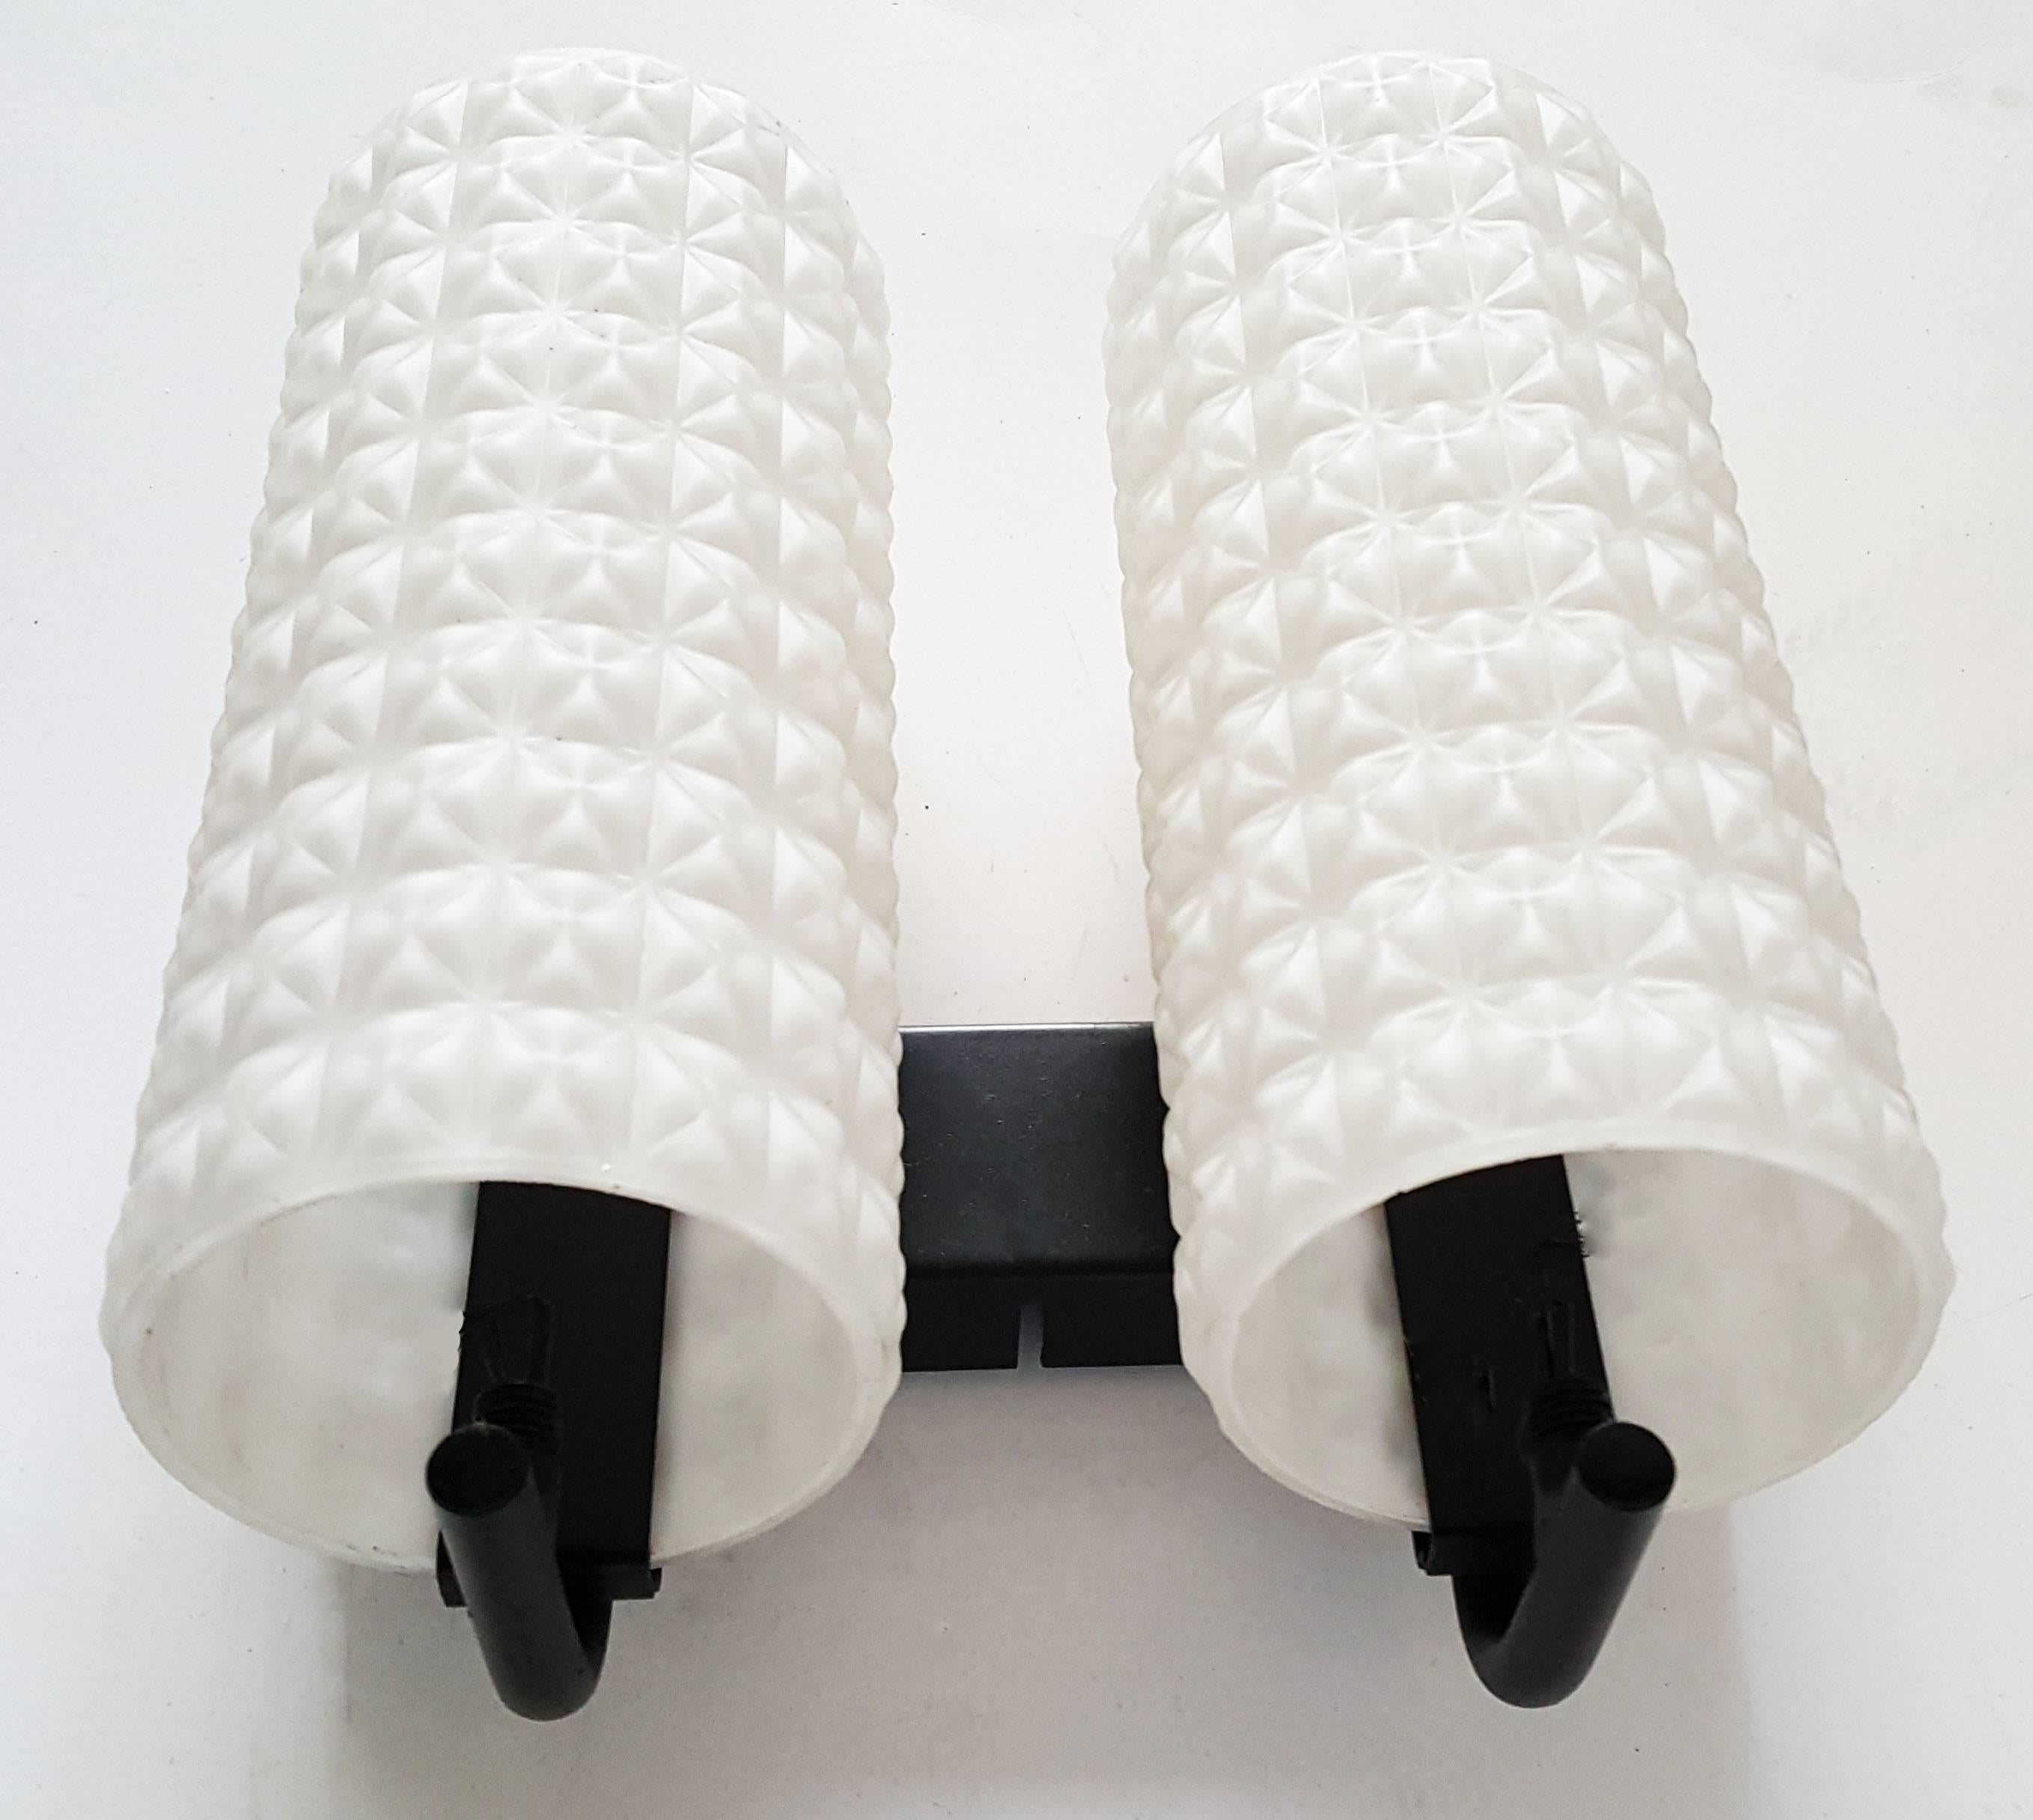 Pair of two-light modernist French sconces
Back plate dimension: 1 3/4 high 8 inches long.